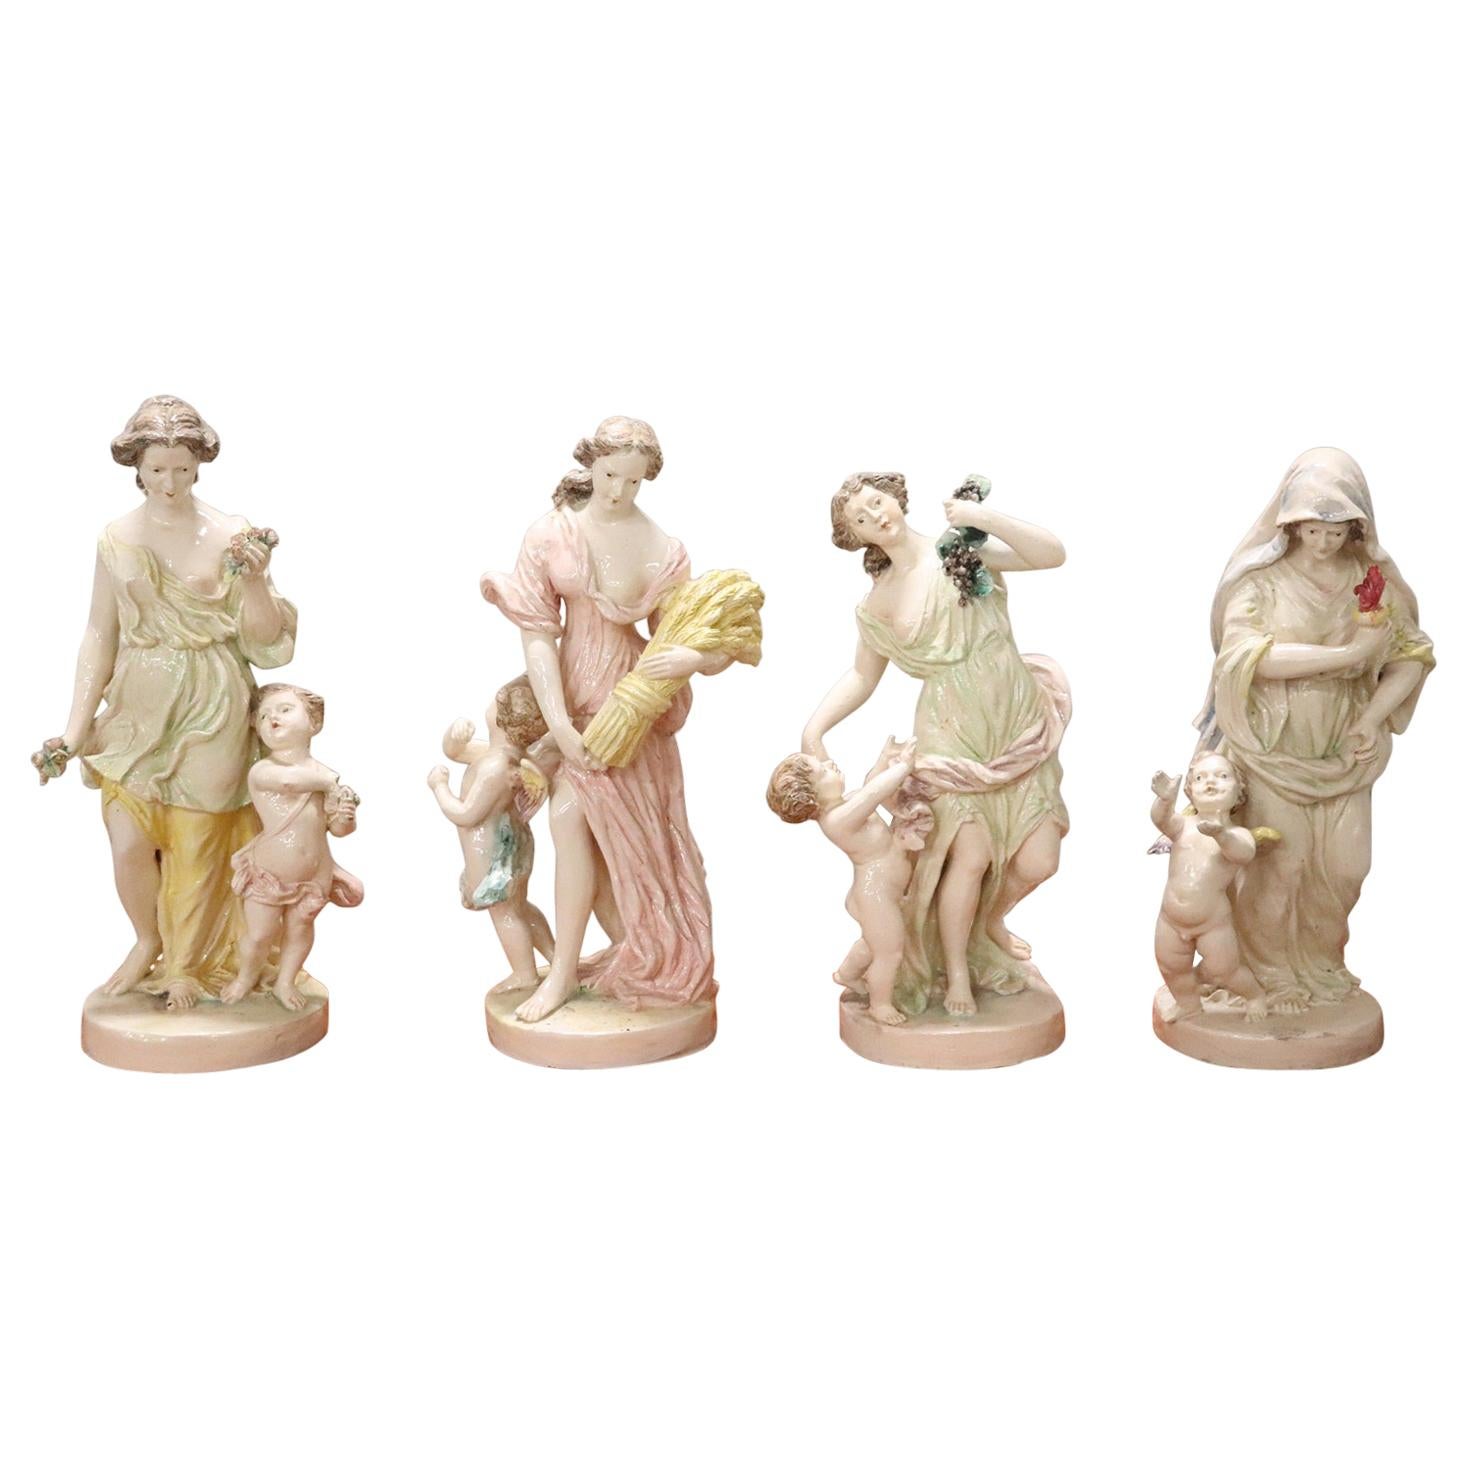 20th Century Porcelain Sculpture Hand Painted "the Four Seasons" by Capodimonte